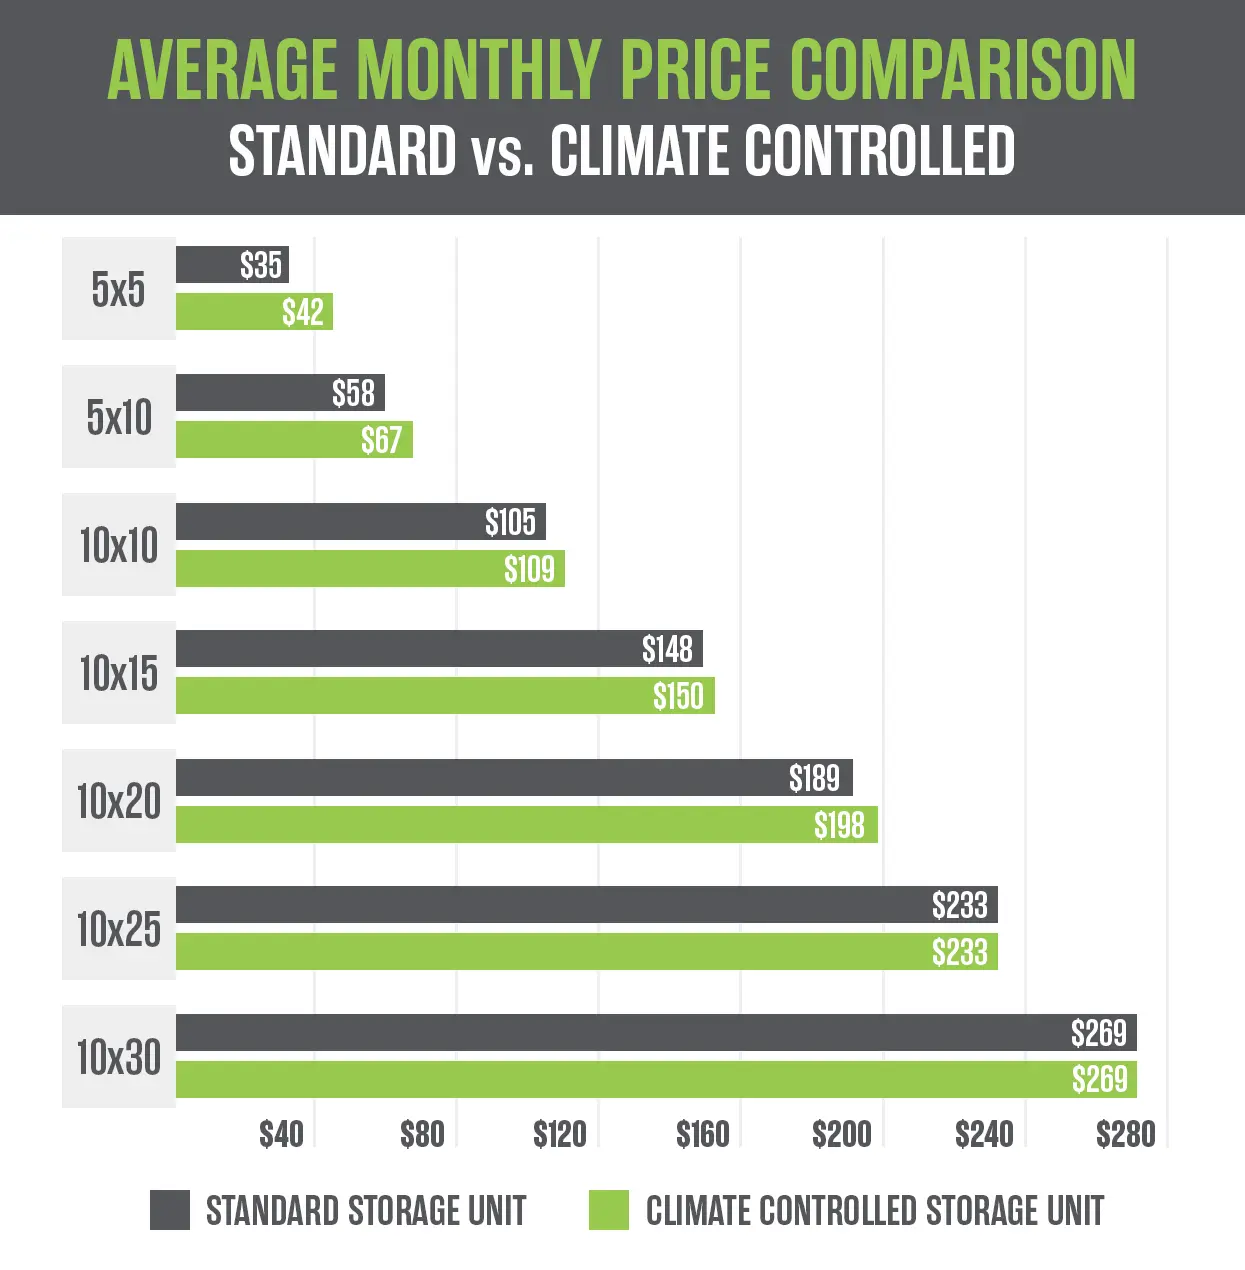 Bar graph comparing average monthly price of standard and climate-controlled storage units from sizes 5x5 to 10x30 